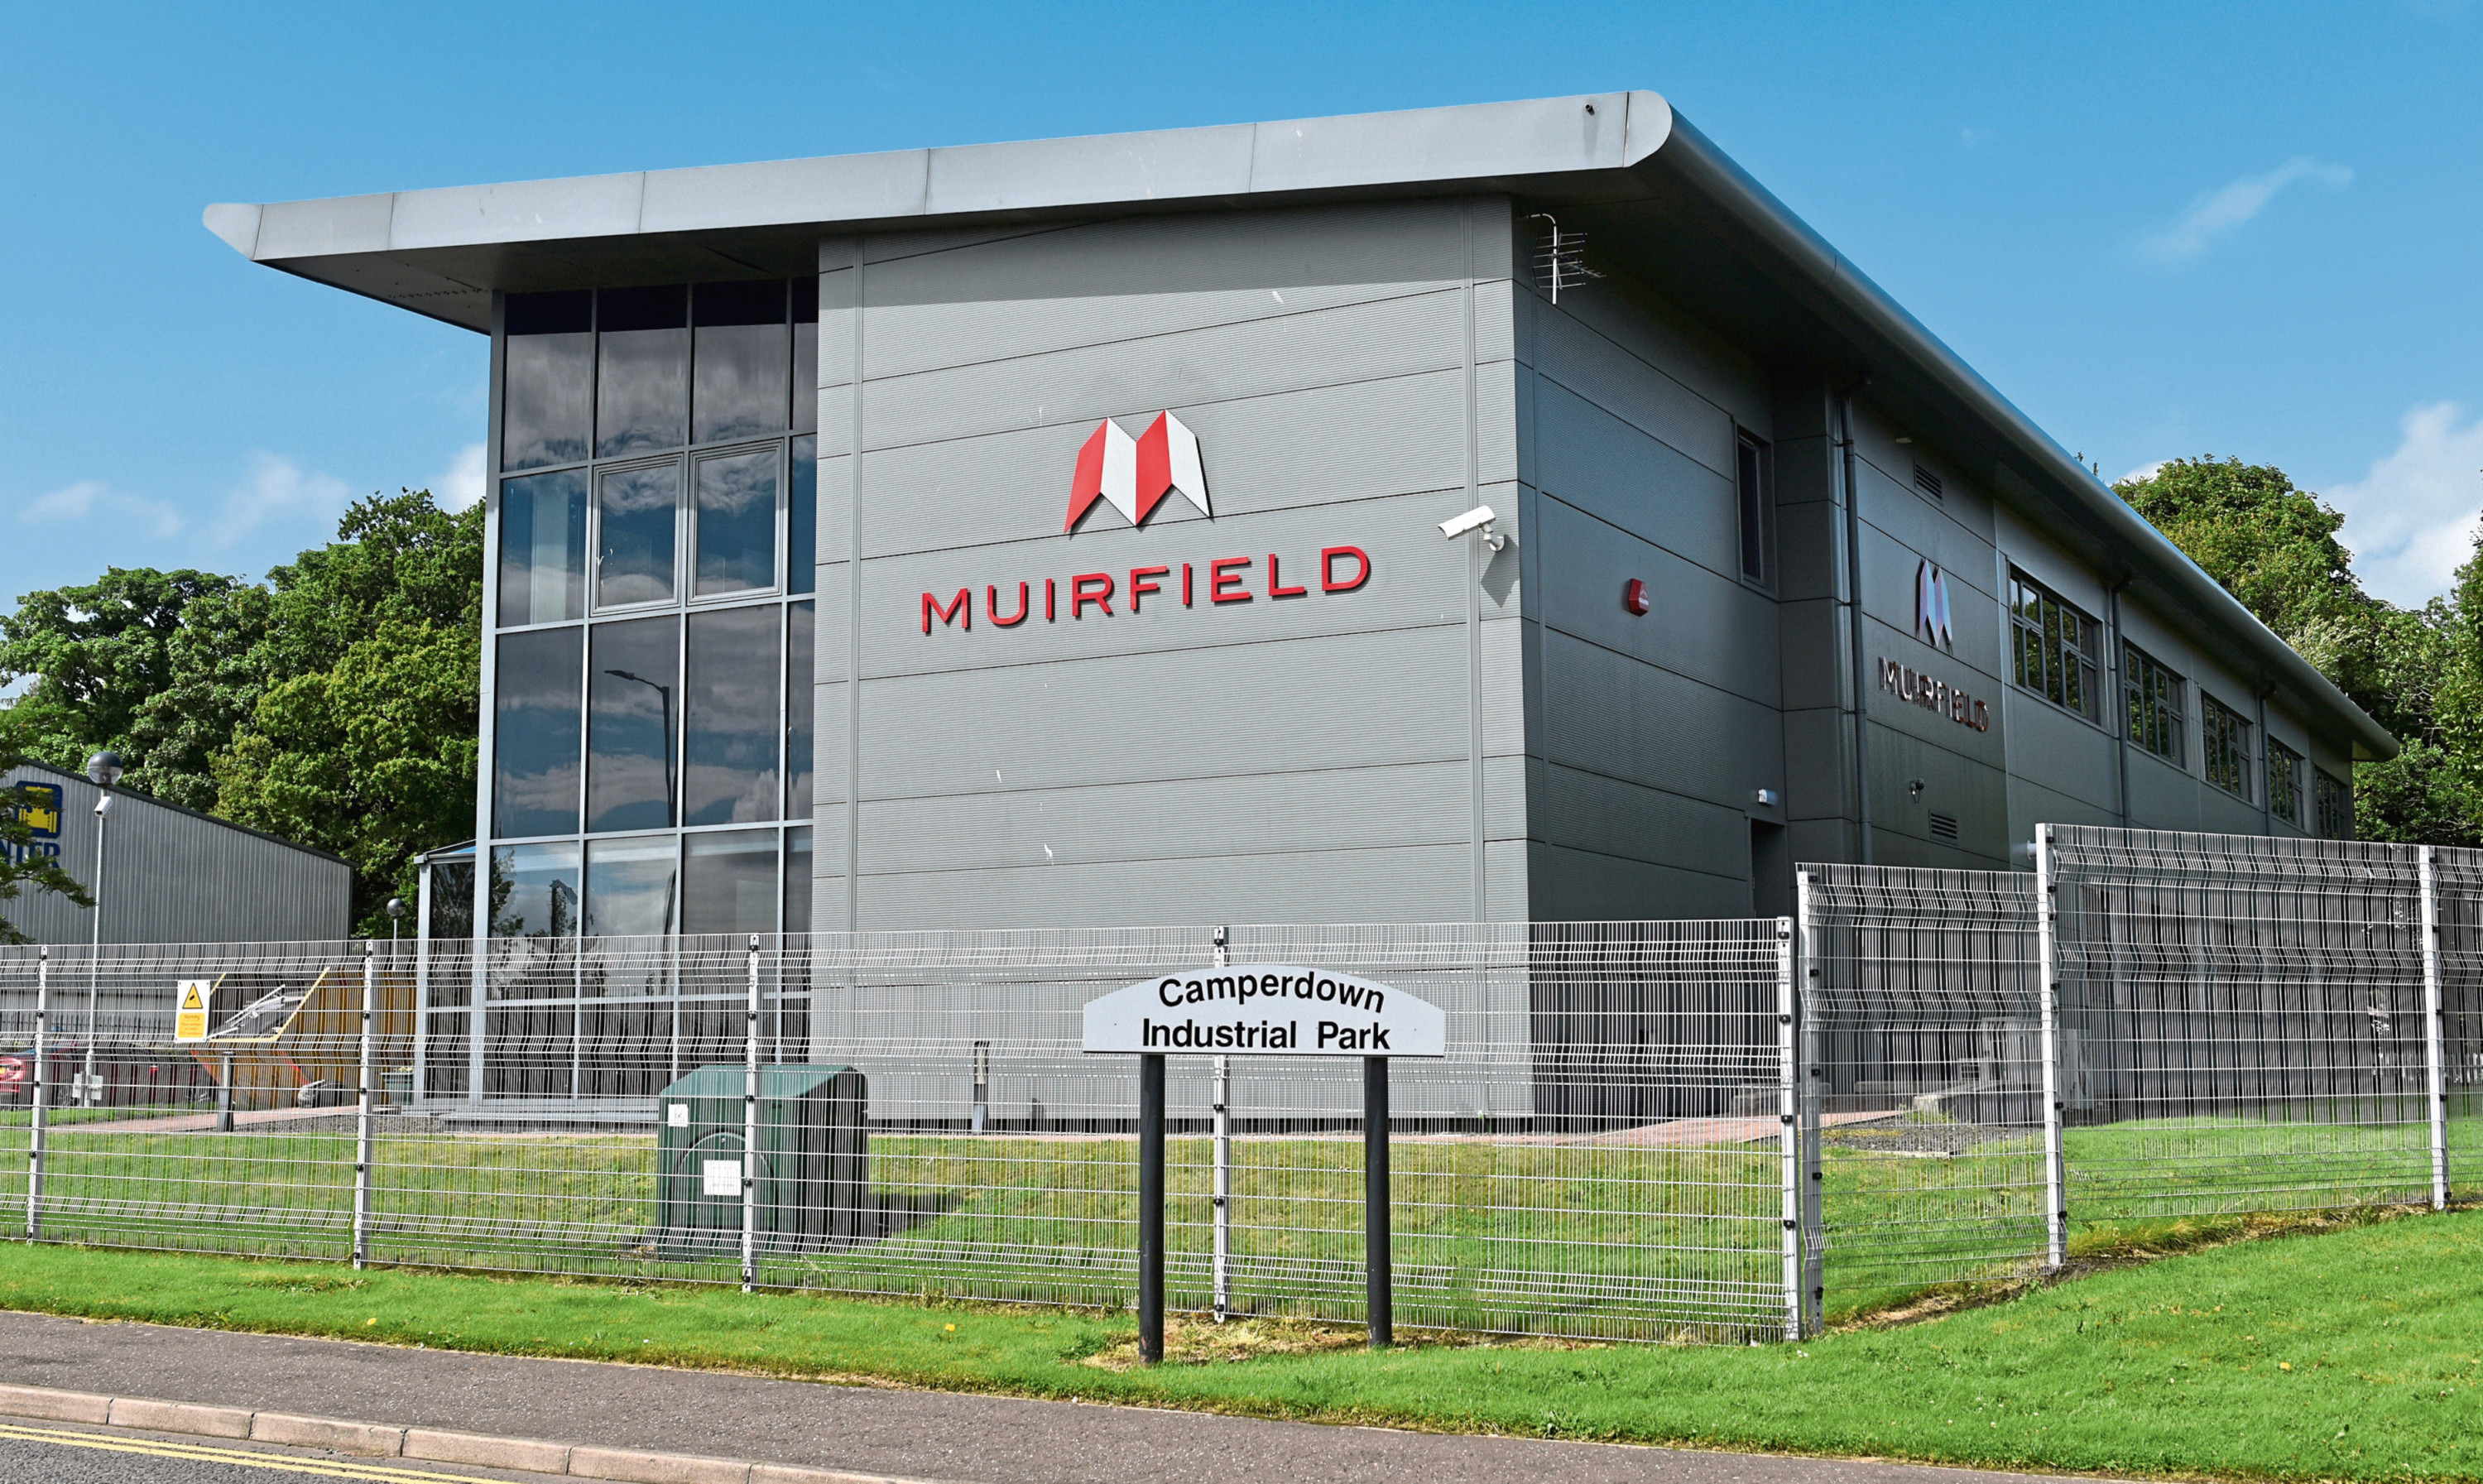 21.07.15 - pictured is the former Muirfield Contracts HQ, George Buckman Drive, Camperdown Industrial Park, Dundee where there is activity emptying some of the contecnts into a skip